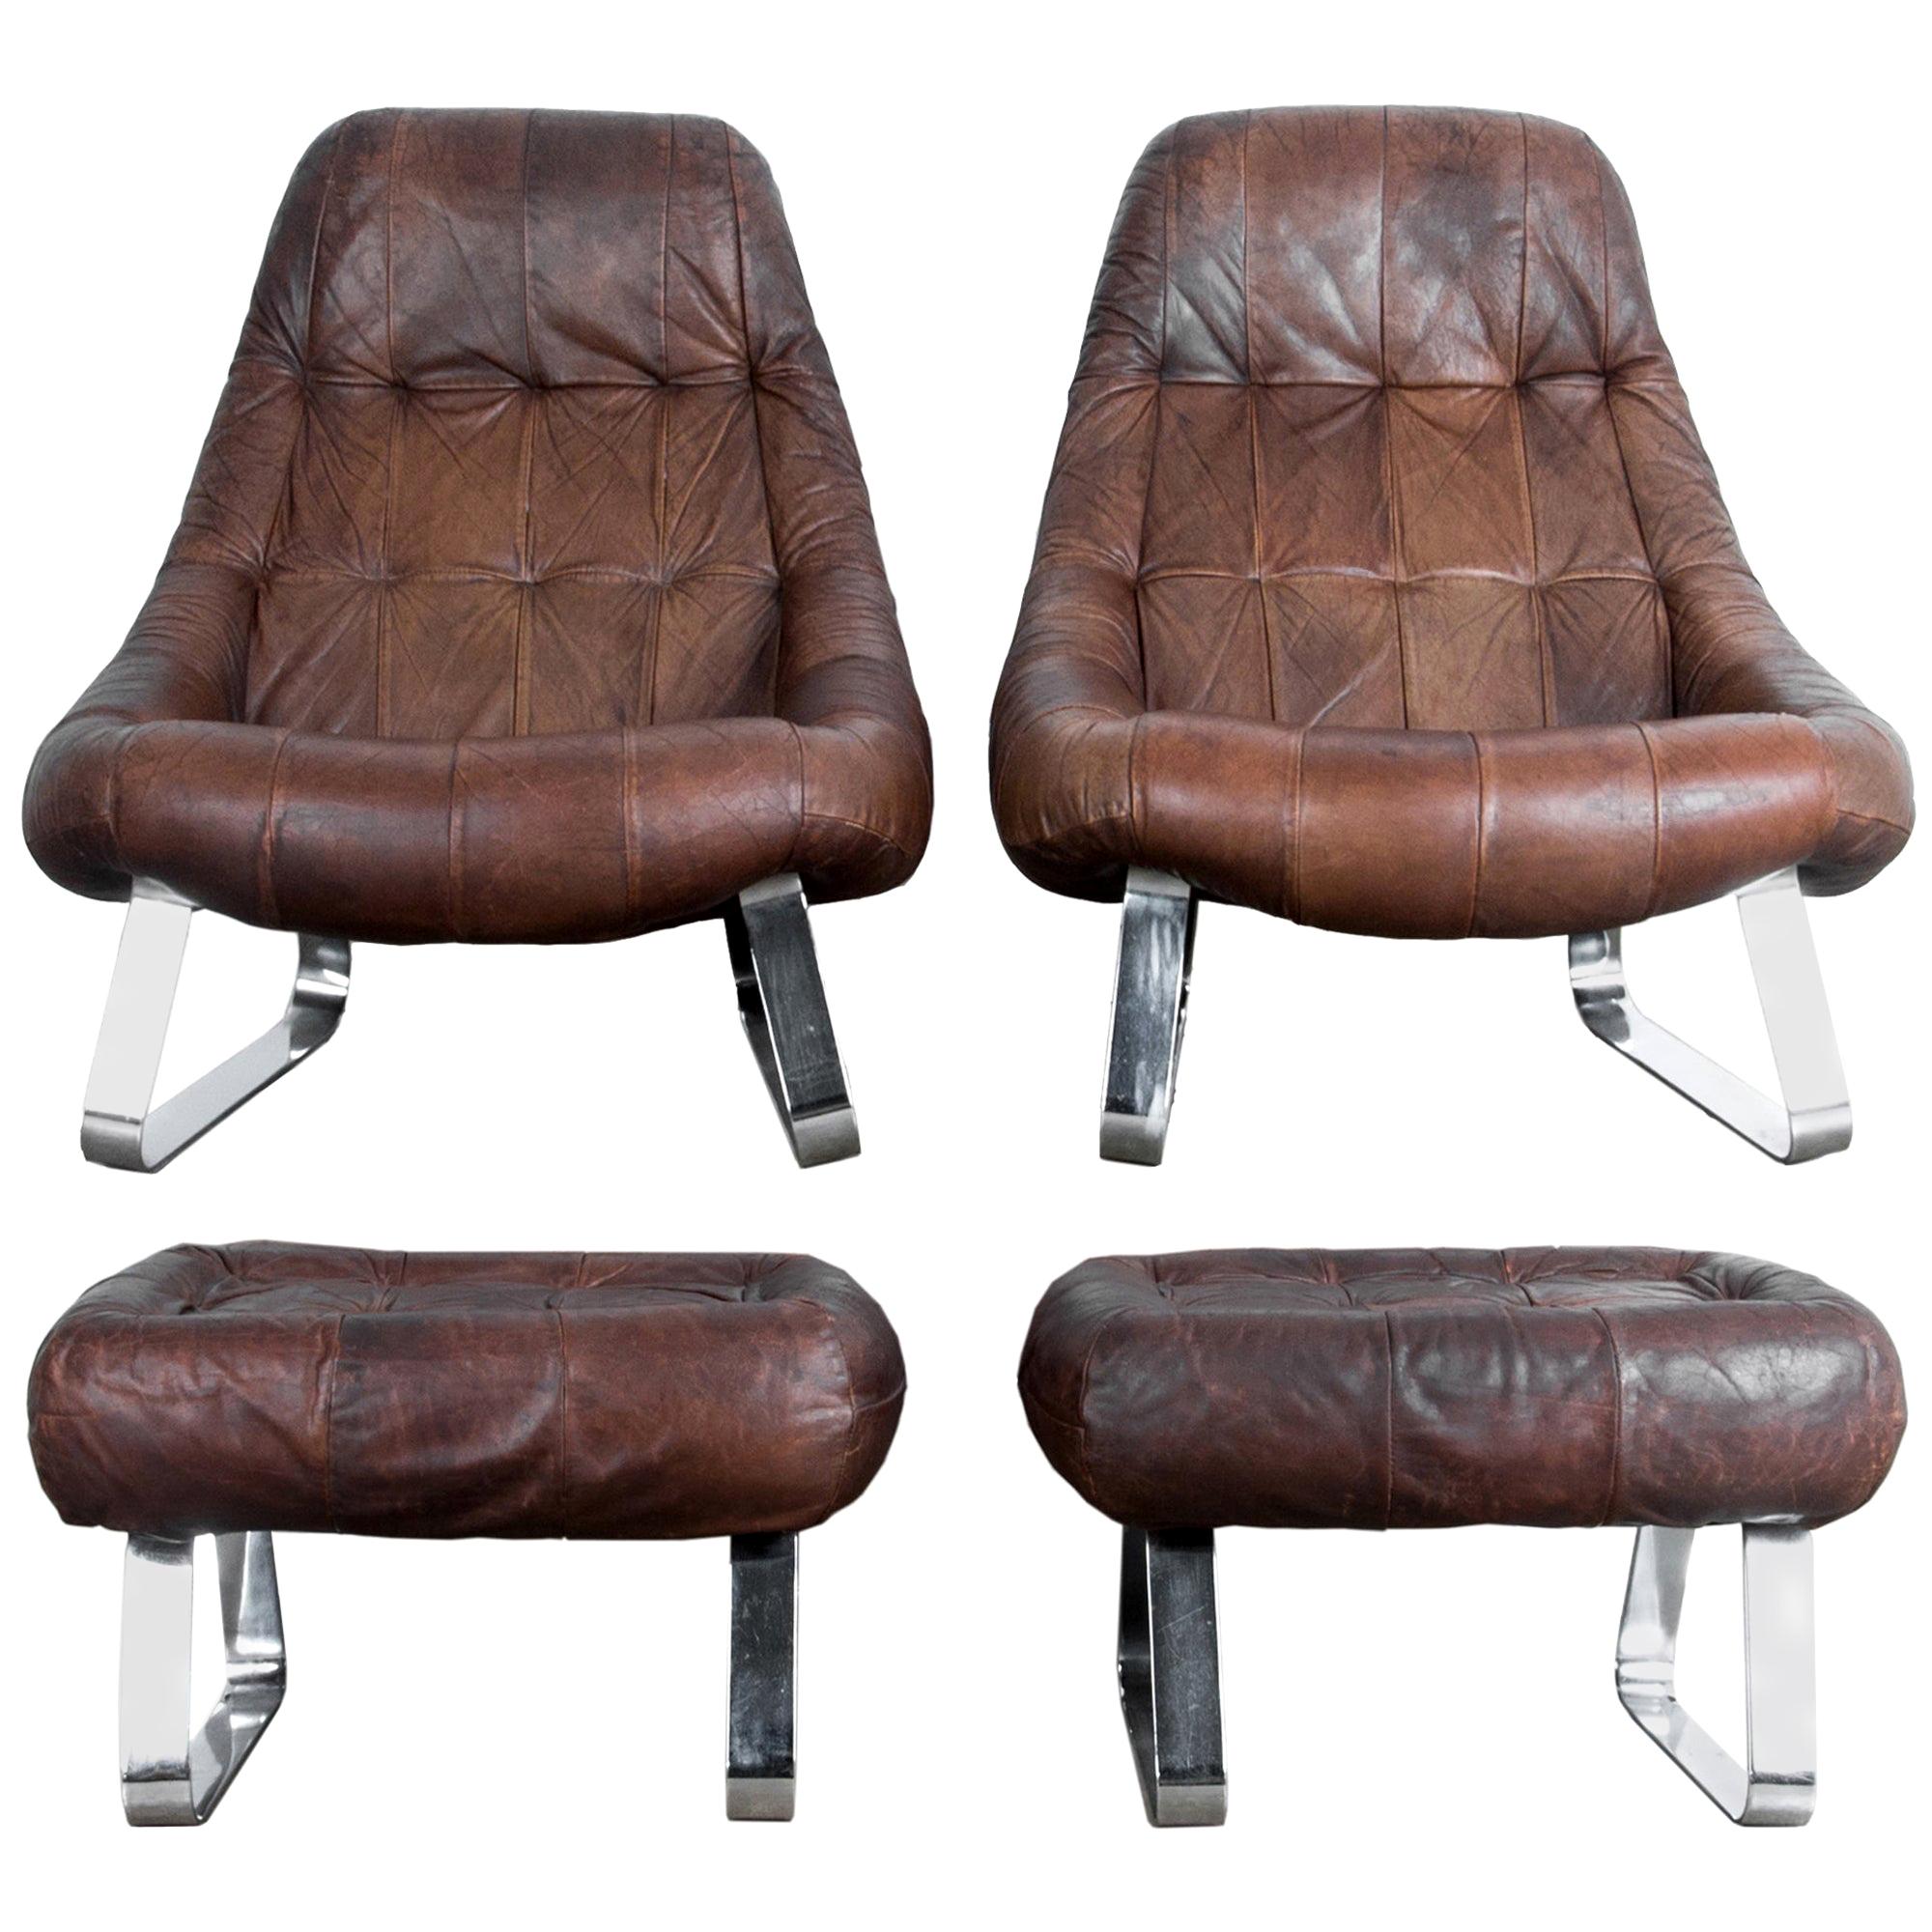 Percival Lafer Dark Brown Chrome Leather "Earth" Chair with Ottoman